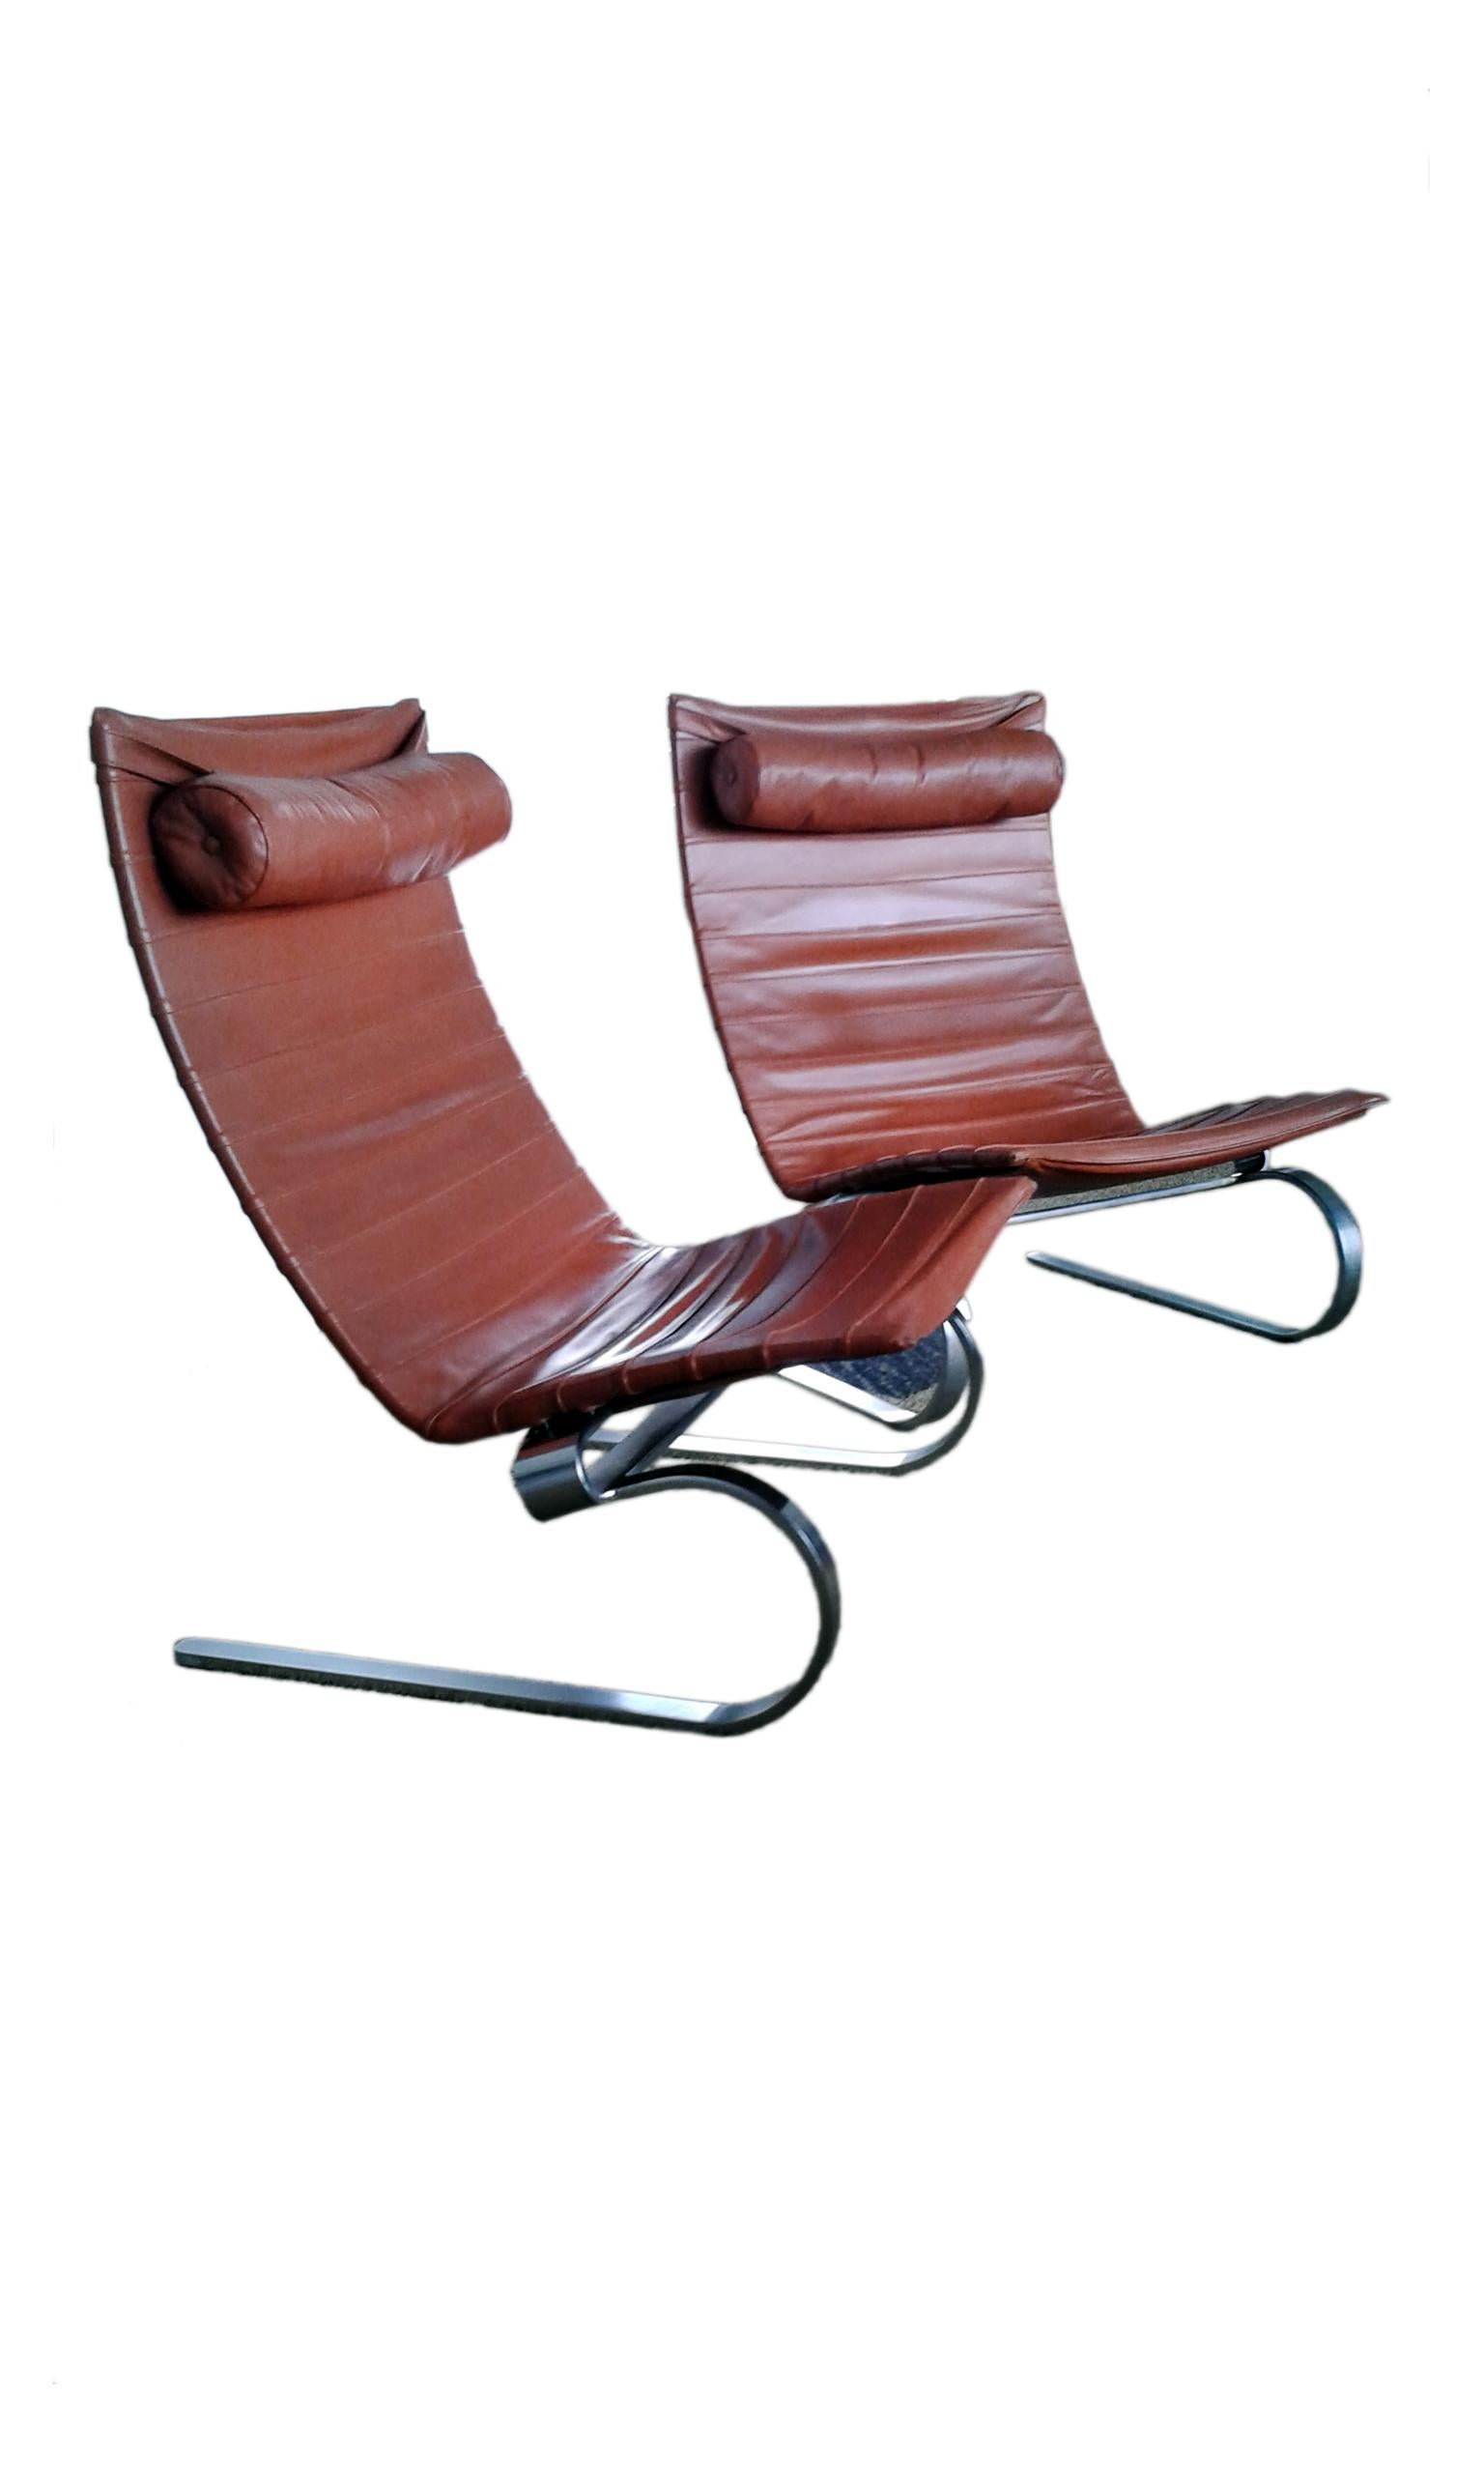 PK 20 is a laidback and elegant lounge chair, built upon a flexible matte chromed spring steel frame. The beautiful curve of the legs and the floating frame distinguish this chair.
Original leather, matte chromed-plated steel frame.
Signed with